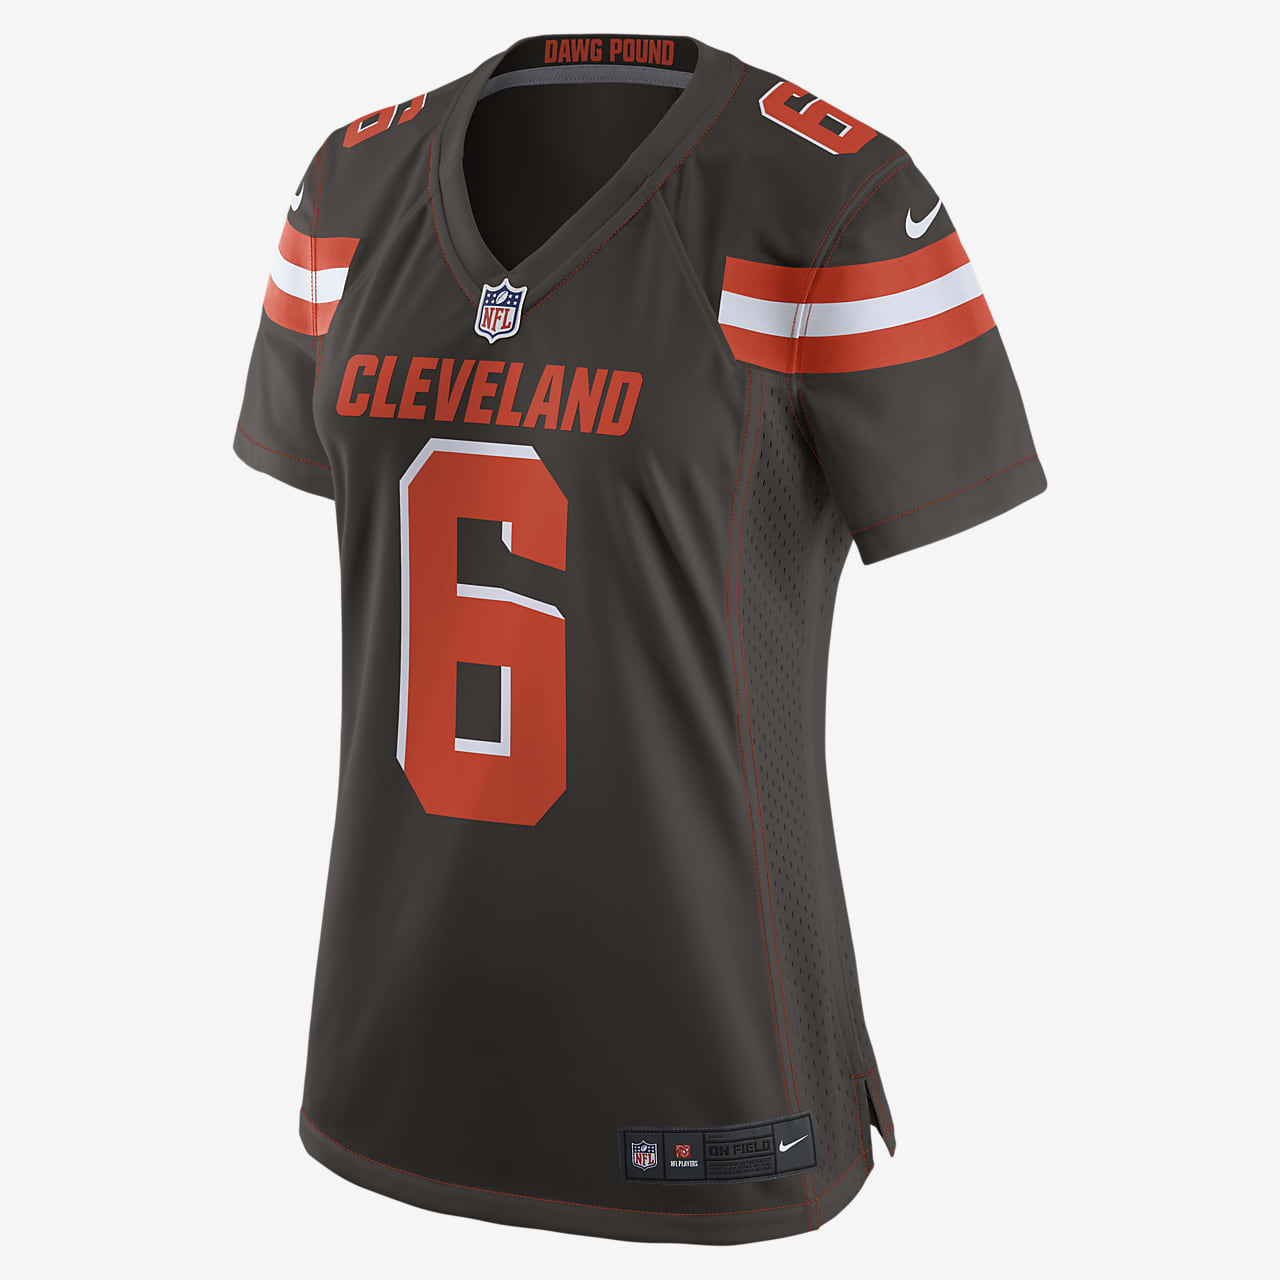 white baker mayfield browns jersey